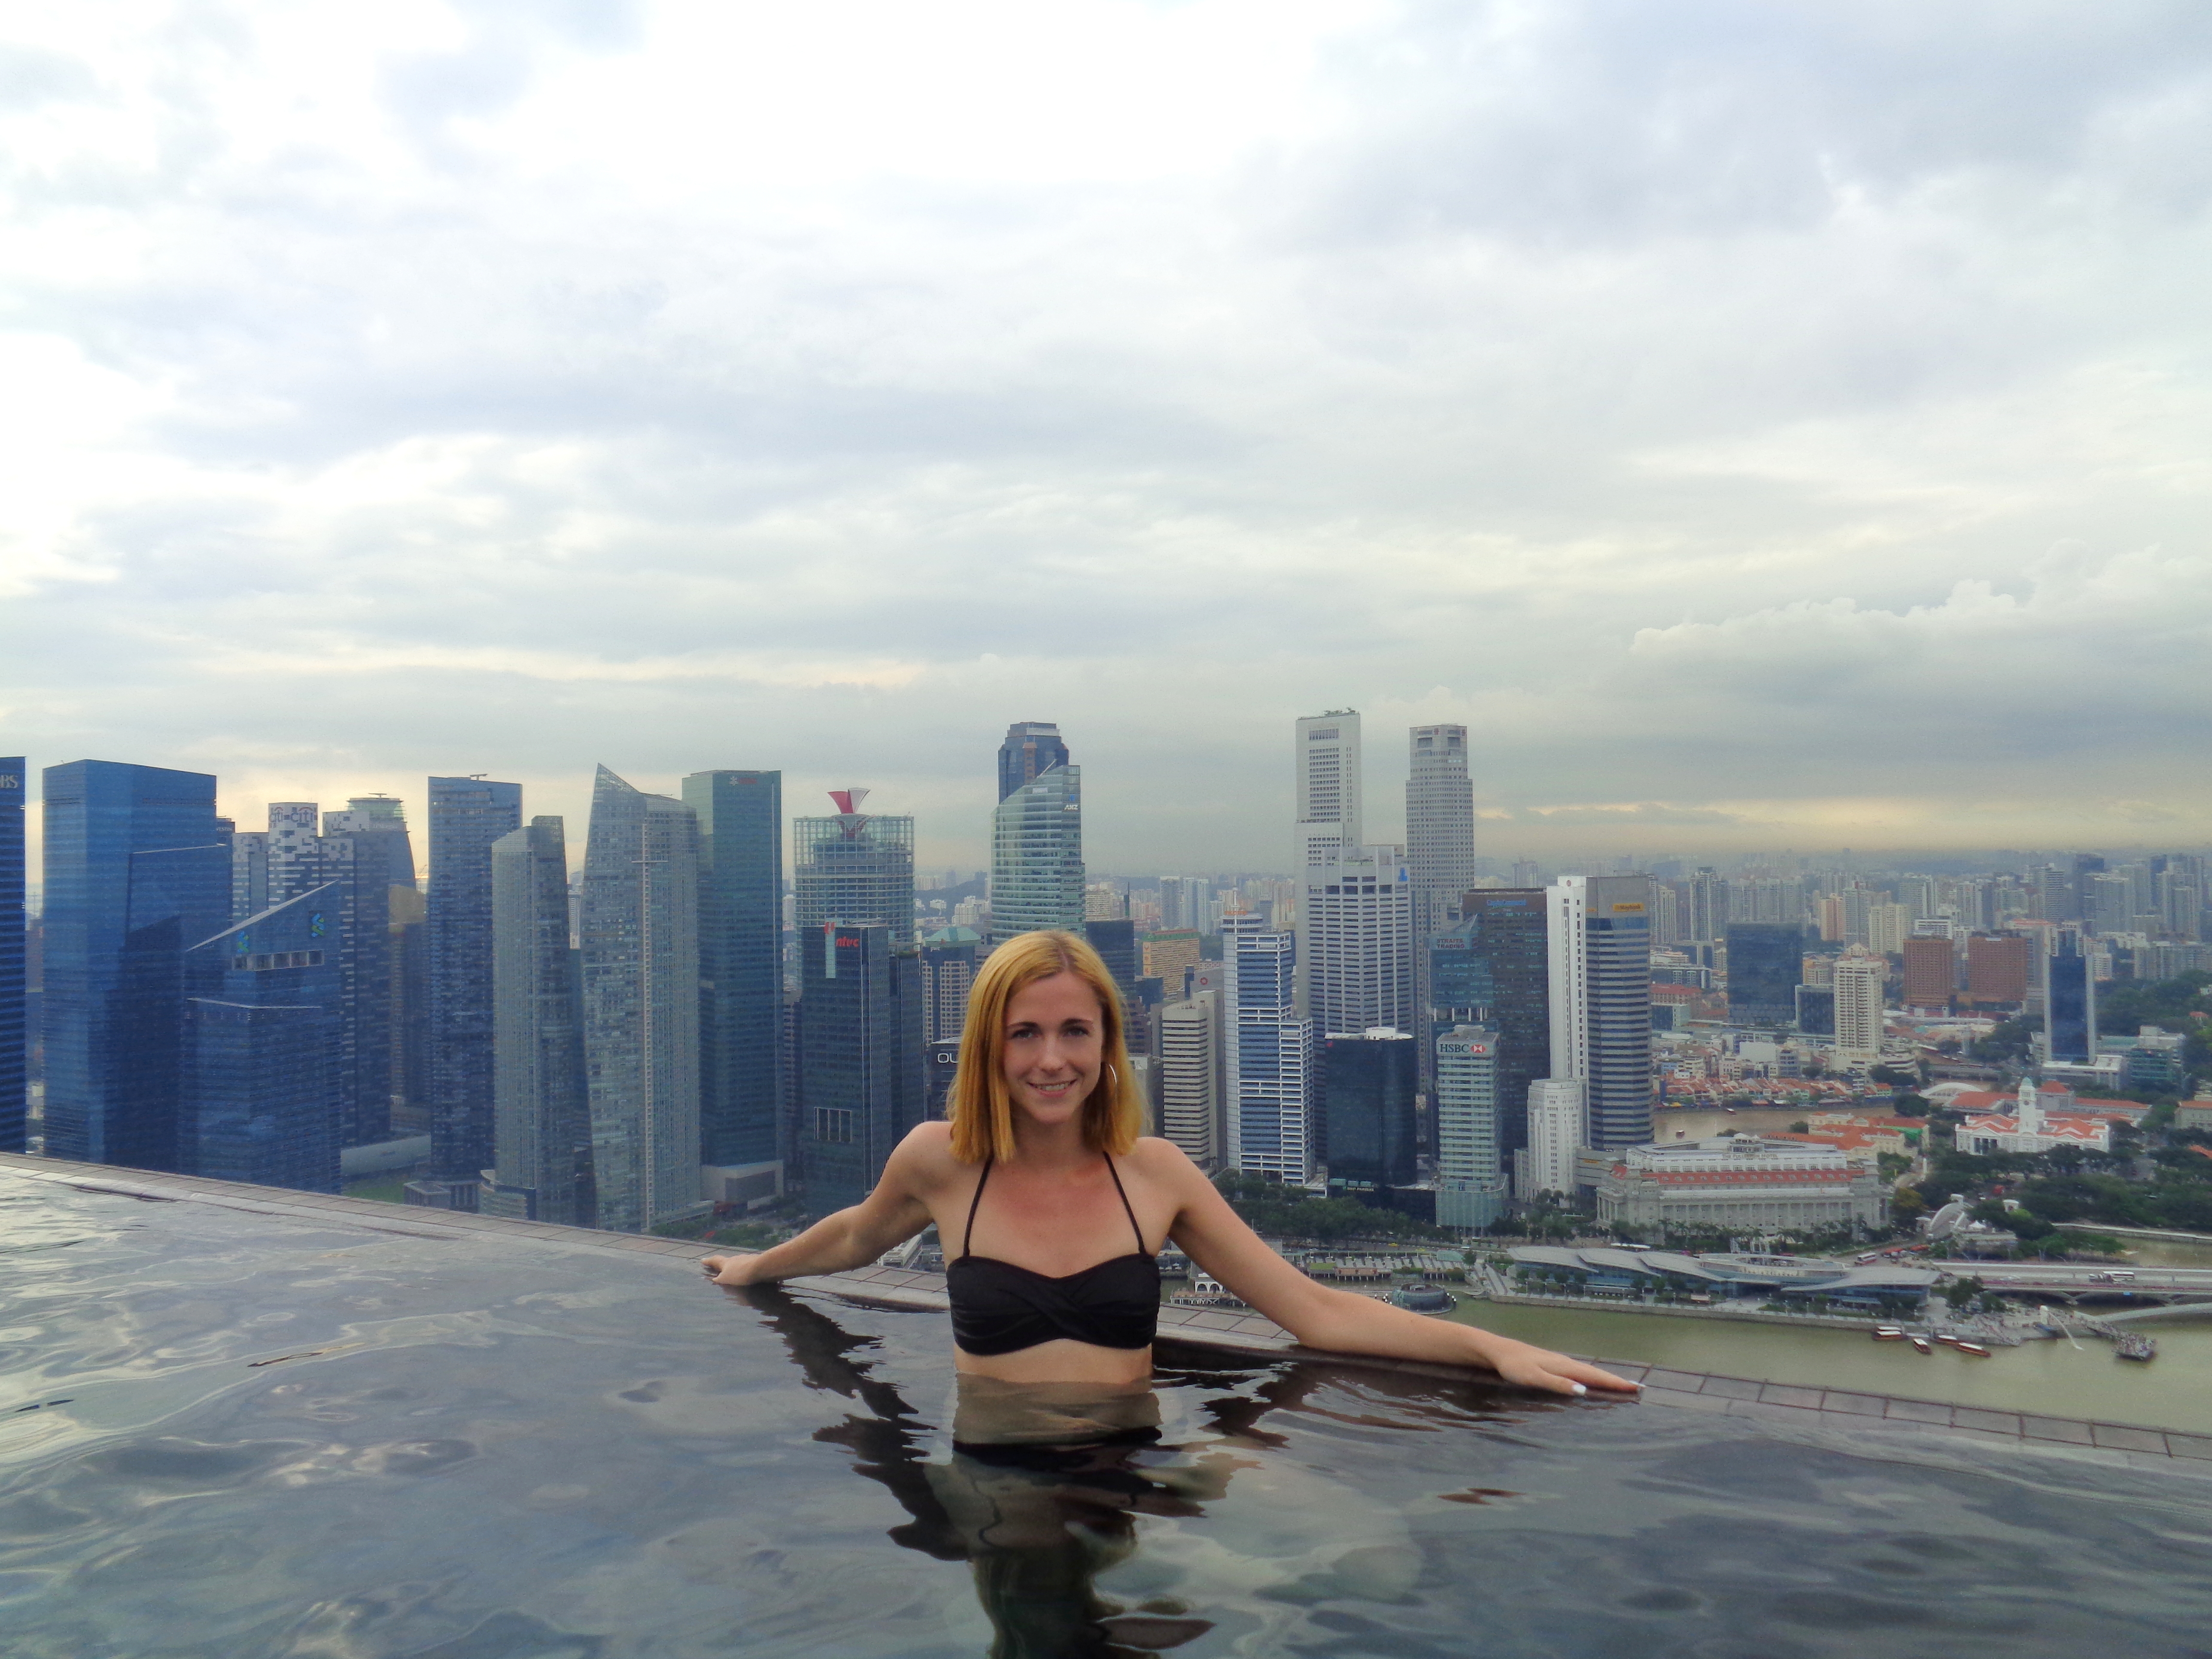 How to save on your next Marina Bay Sands stay - Standard